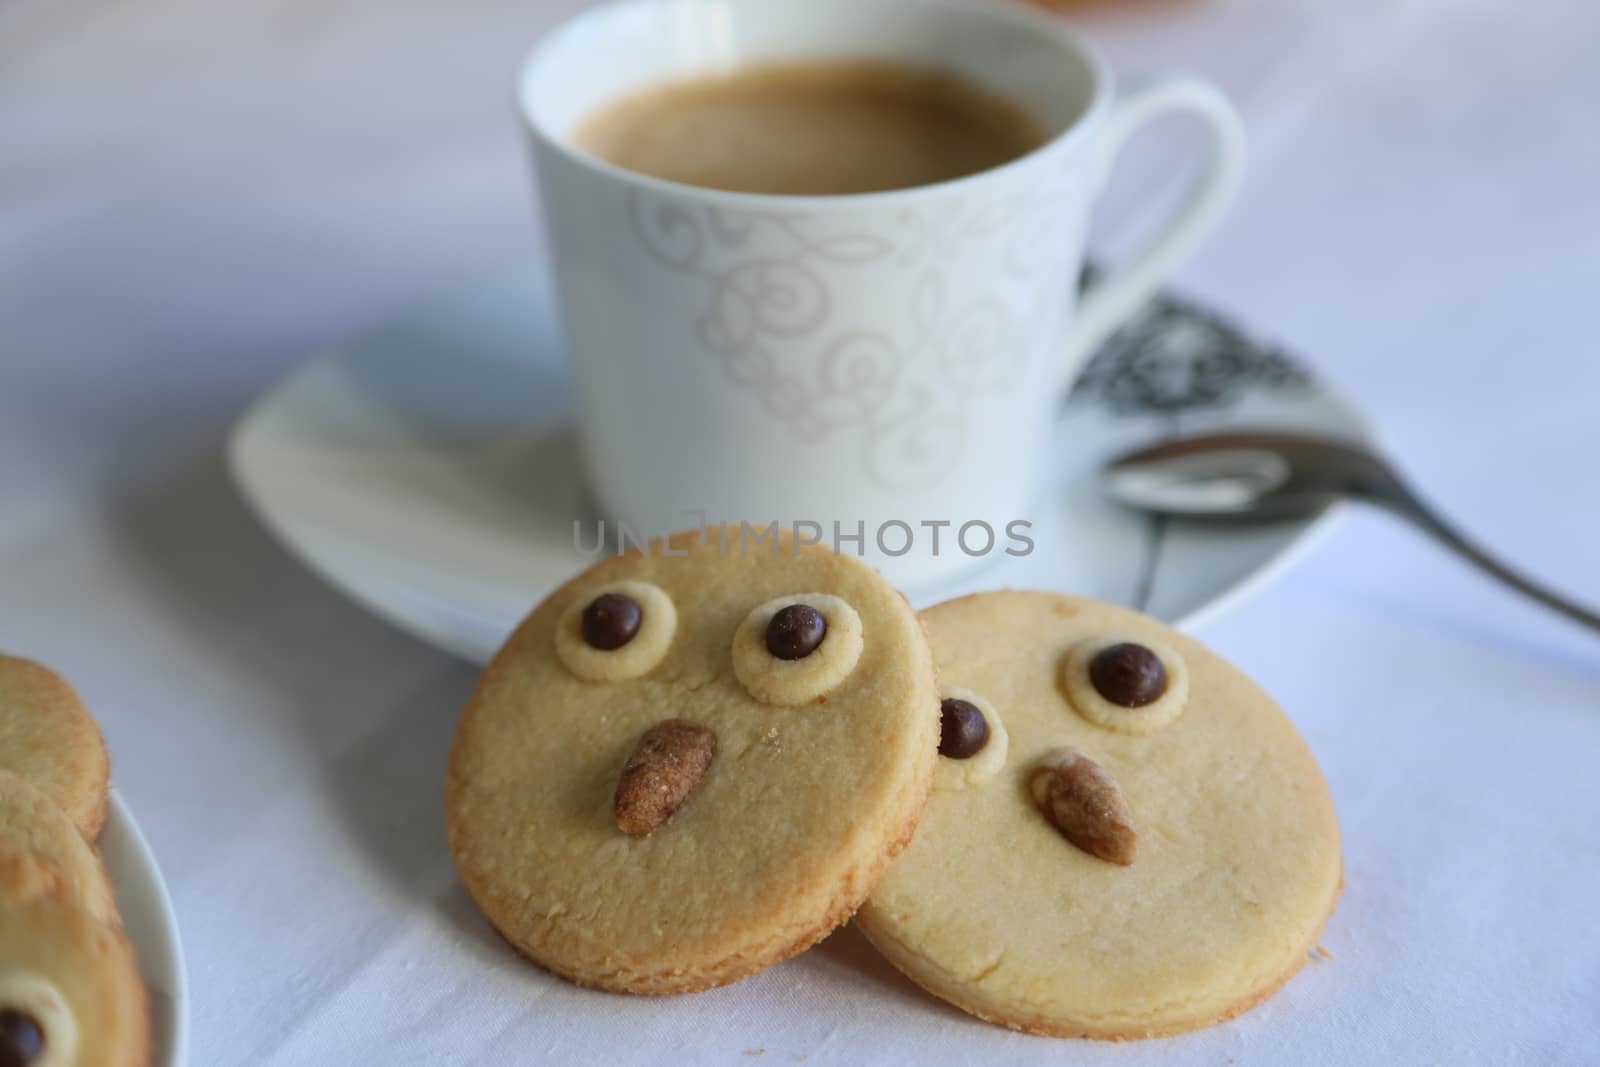 Two owl biscuits and a cup of coffee by tolikoff_photography